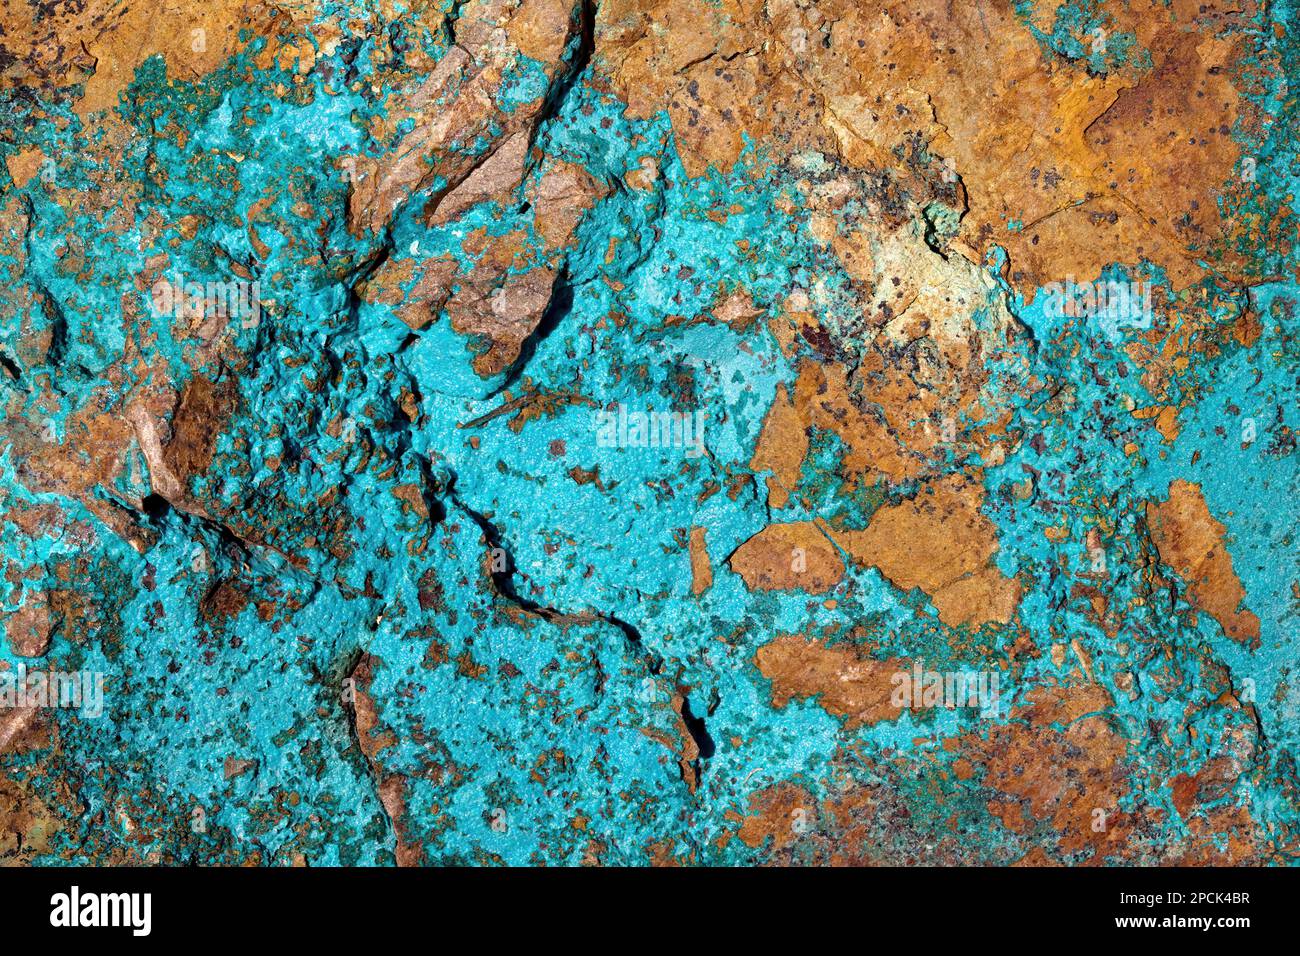 Blue copper minerals on rock Stock Photo